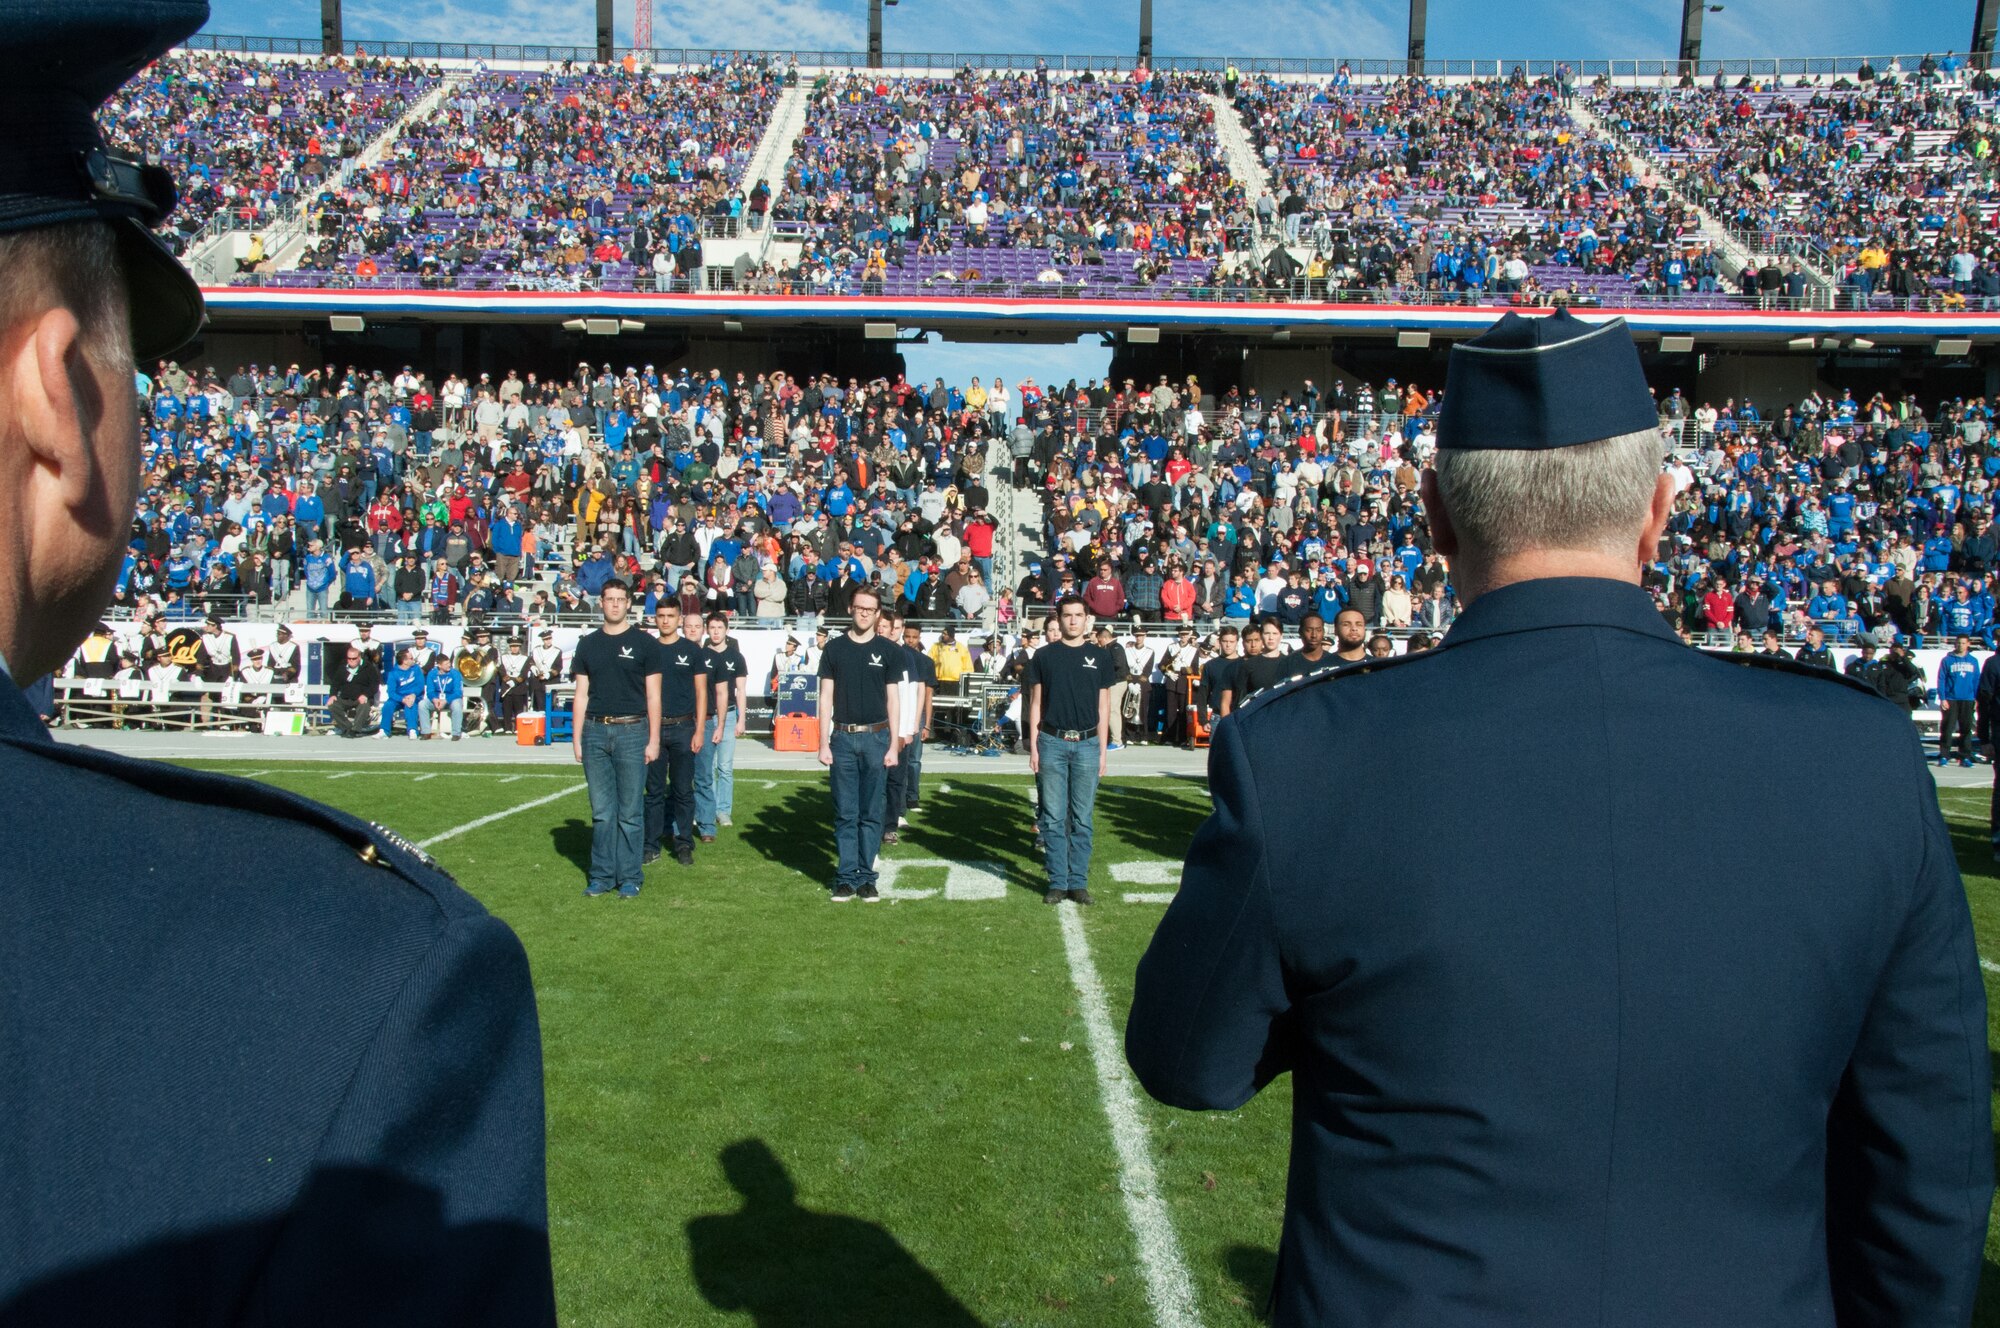 NAVAL AIR STATION FORT WORTH JOINT RESERVE BASE, Texas - Chief of Staff of the Air Force Gen. Mark A. Welsh III and 301st Fighter Wing Commander Col. John Breazeale stand before 25 Air Force recruits Dec. 29 during the halftime mass enlistment at the Armed Forces Bowl in Fort Worth, Texas.  The U.S. Air Force Academy and the University of California battled for the championship, but in the end the Bears beat the Falcons 55 to 36. (U.S. Air Force photo by Staff Sgt. Melissa Harvey)